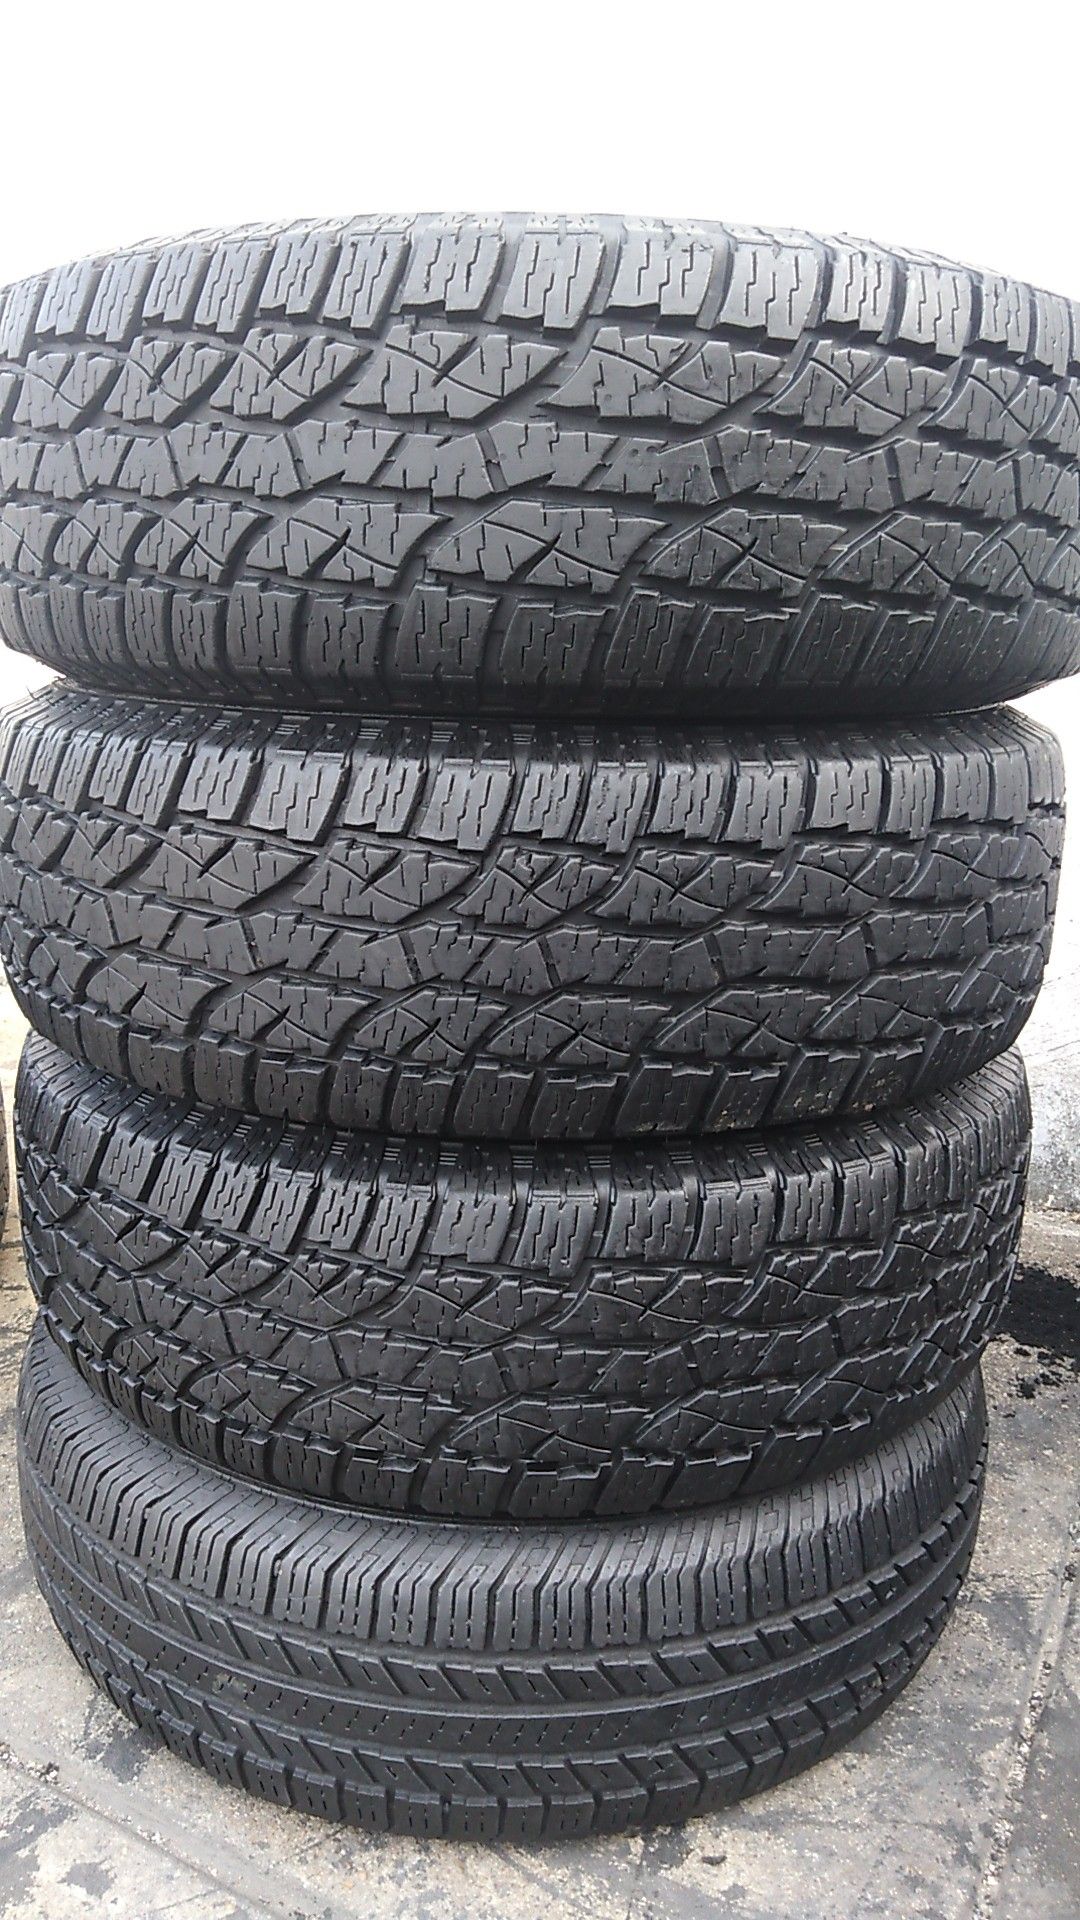 Four tires for sale 235/75/15